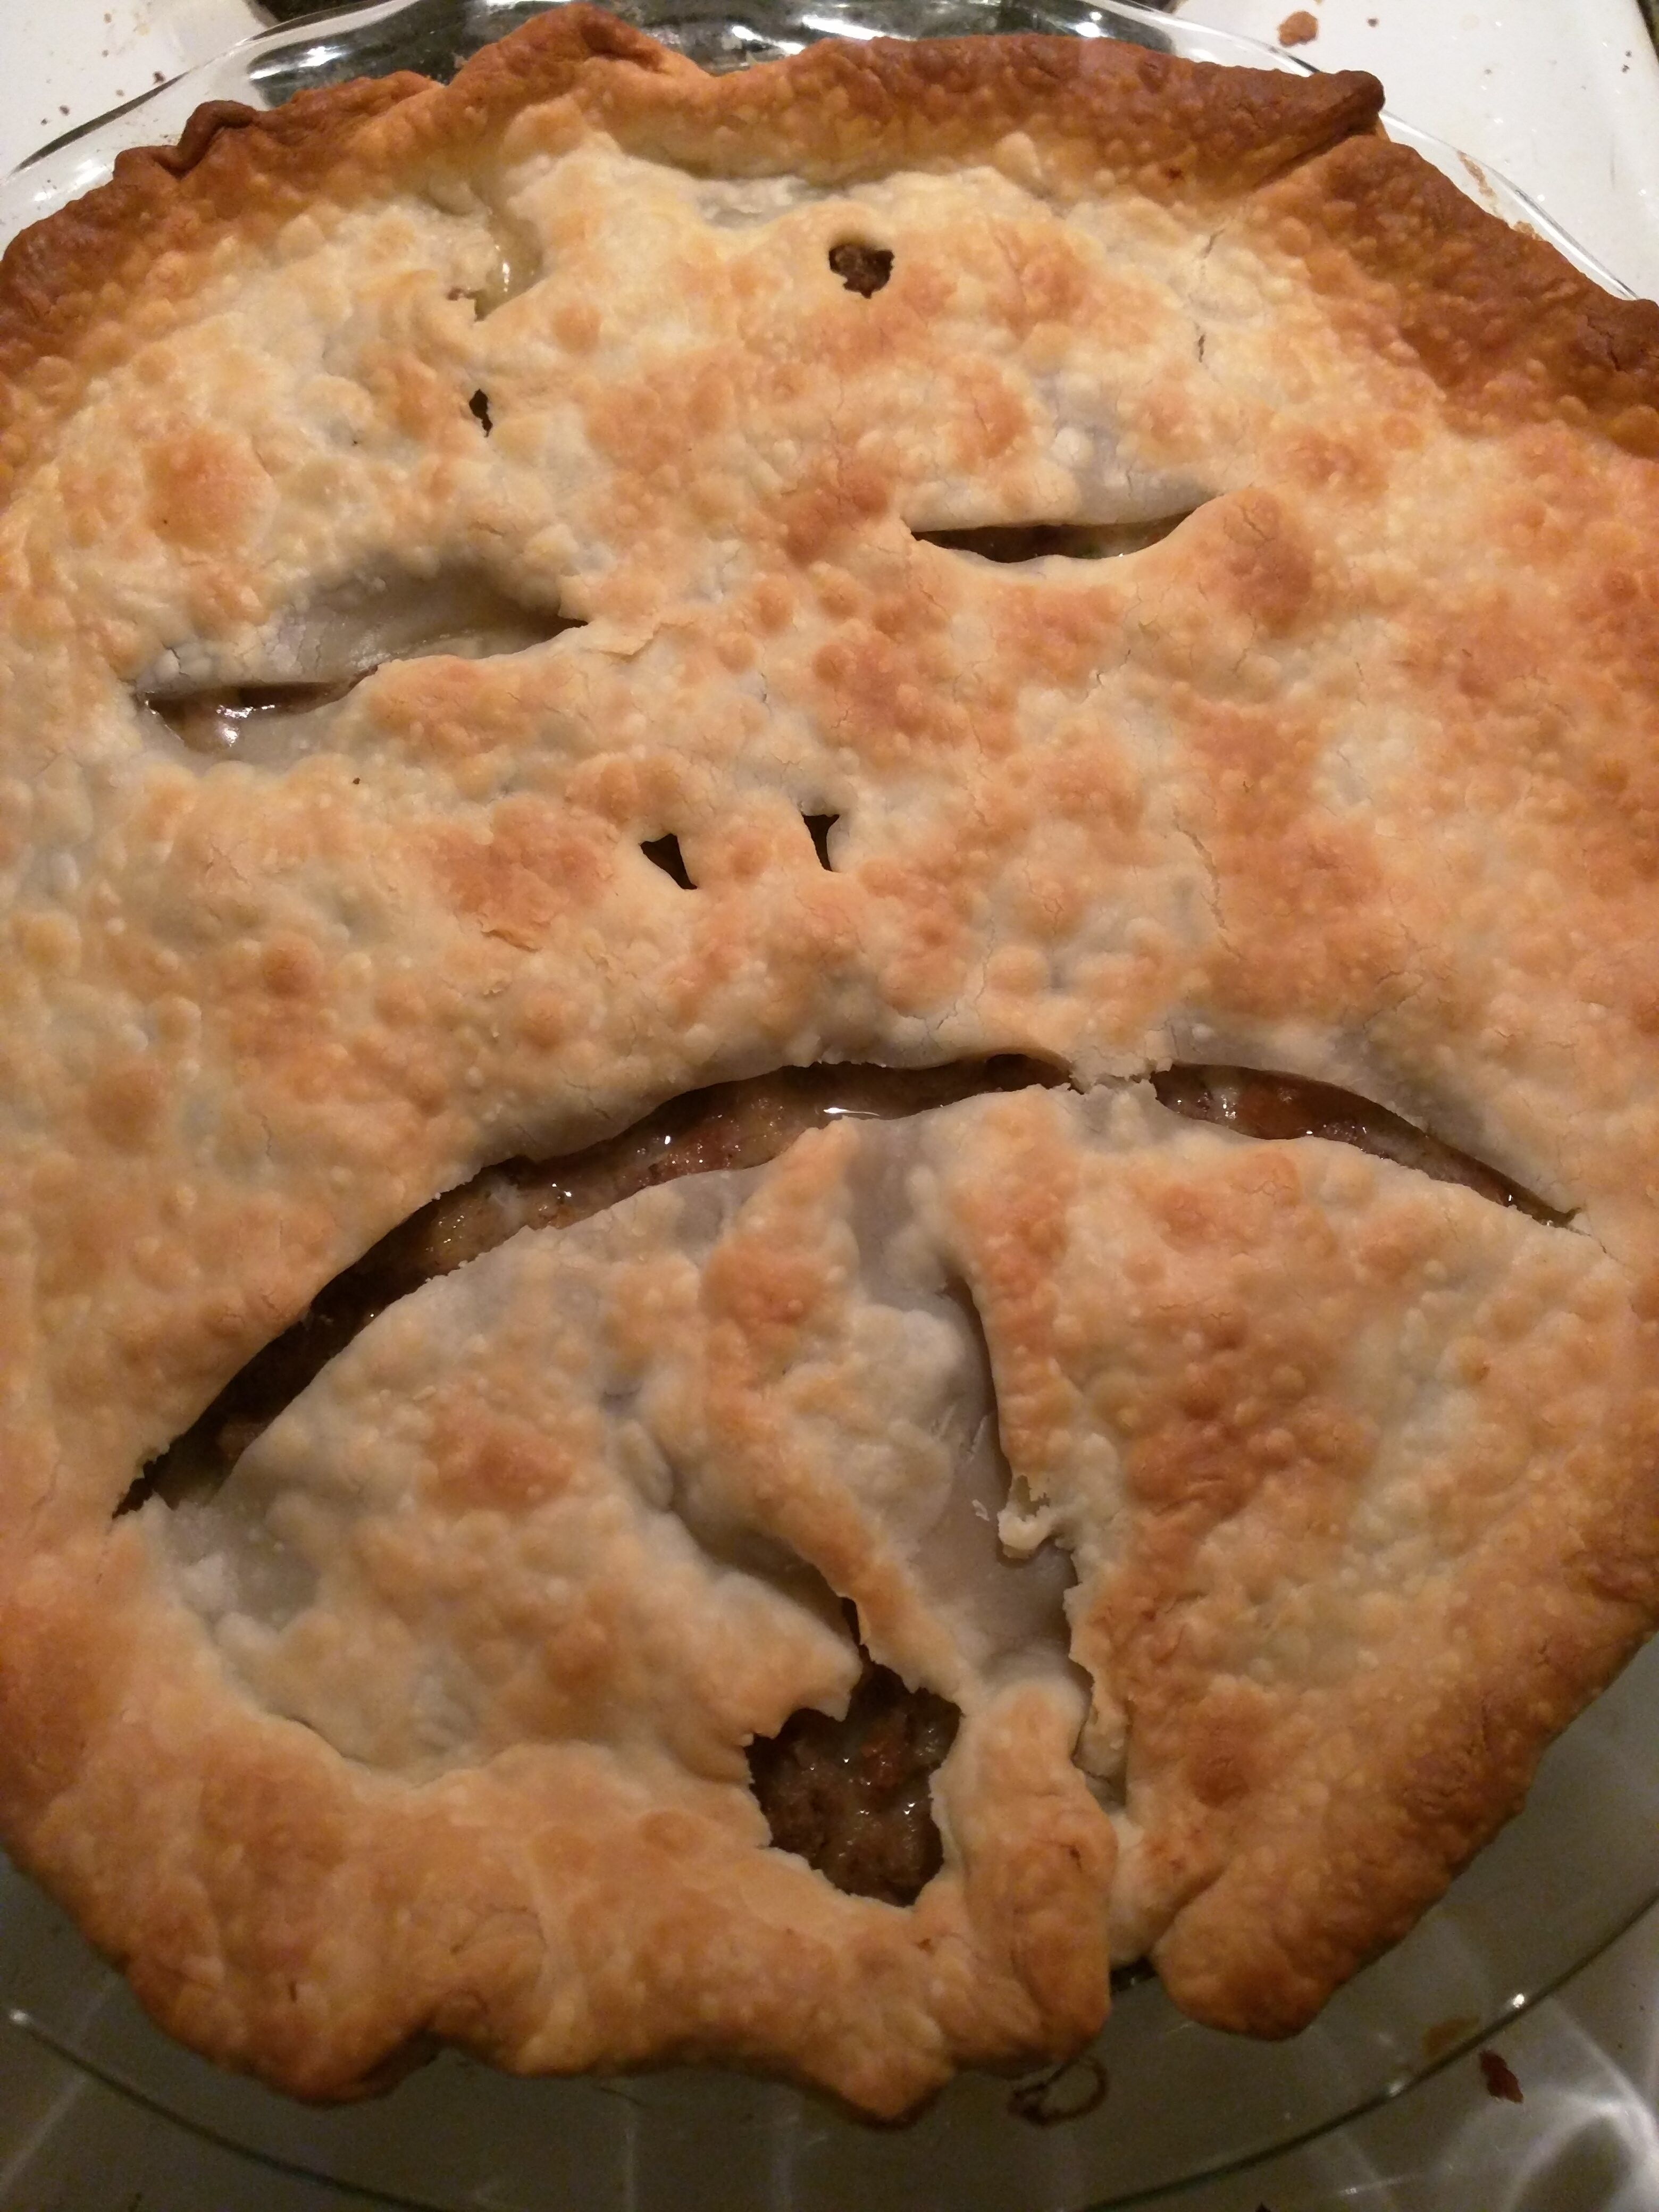 When I ask my husband to cut vents in the turkey pot pie...